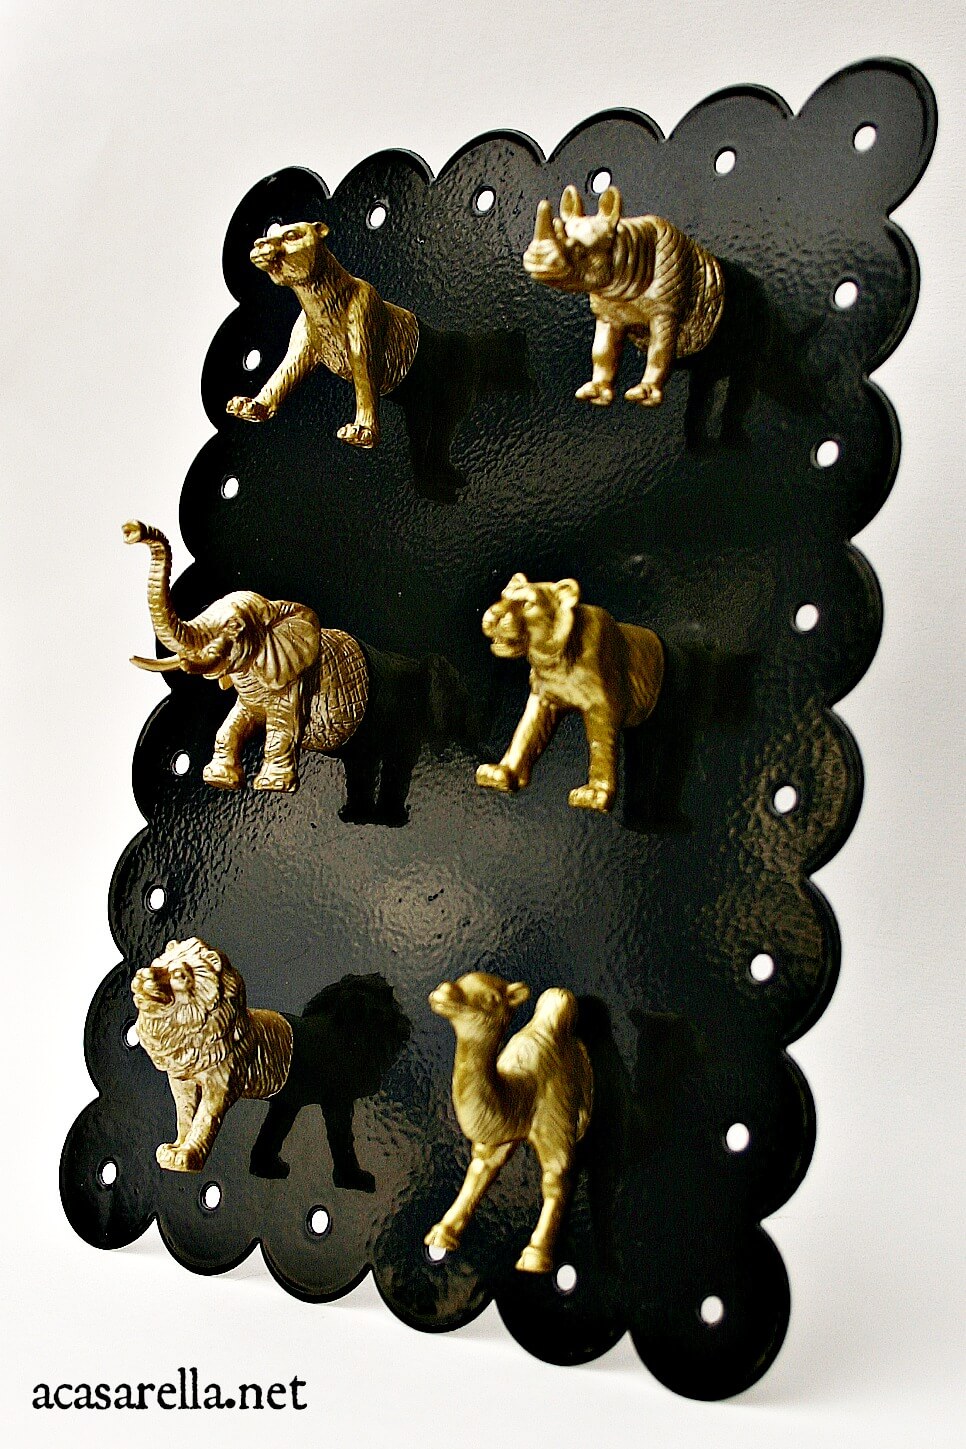 Gilded and Golden DIY Animal Menagerie